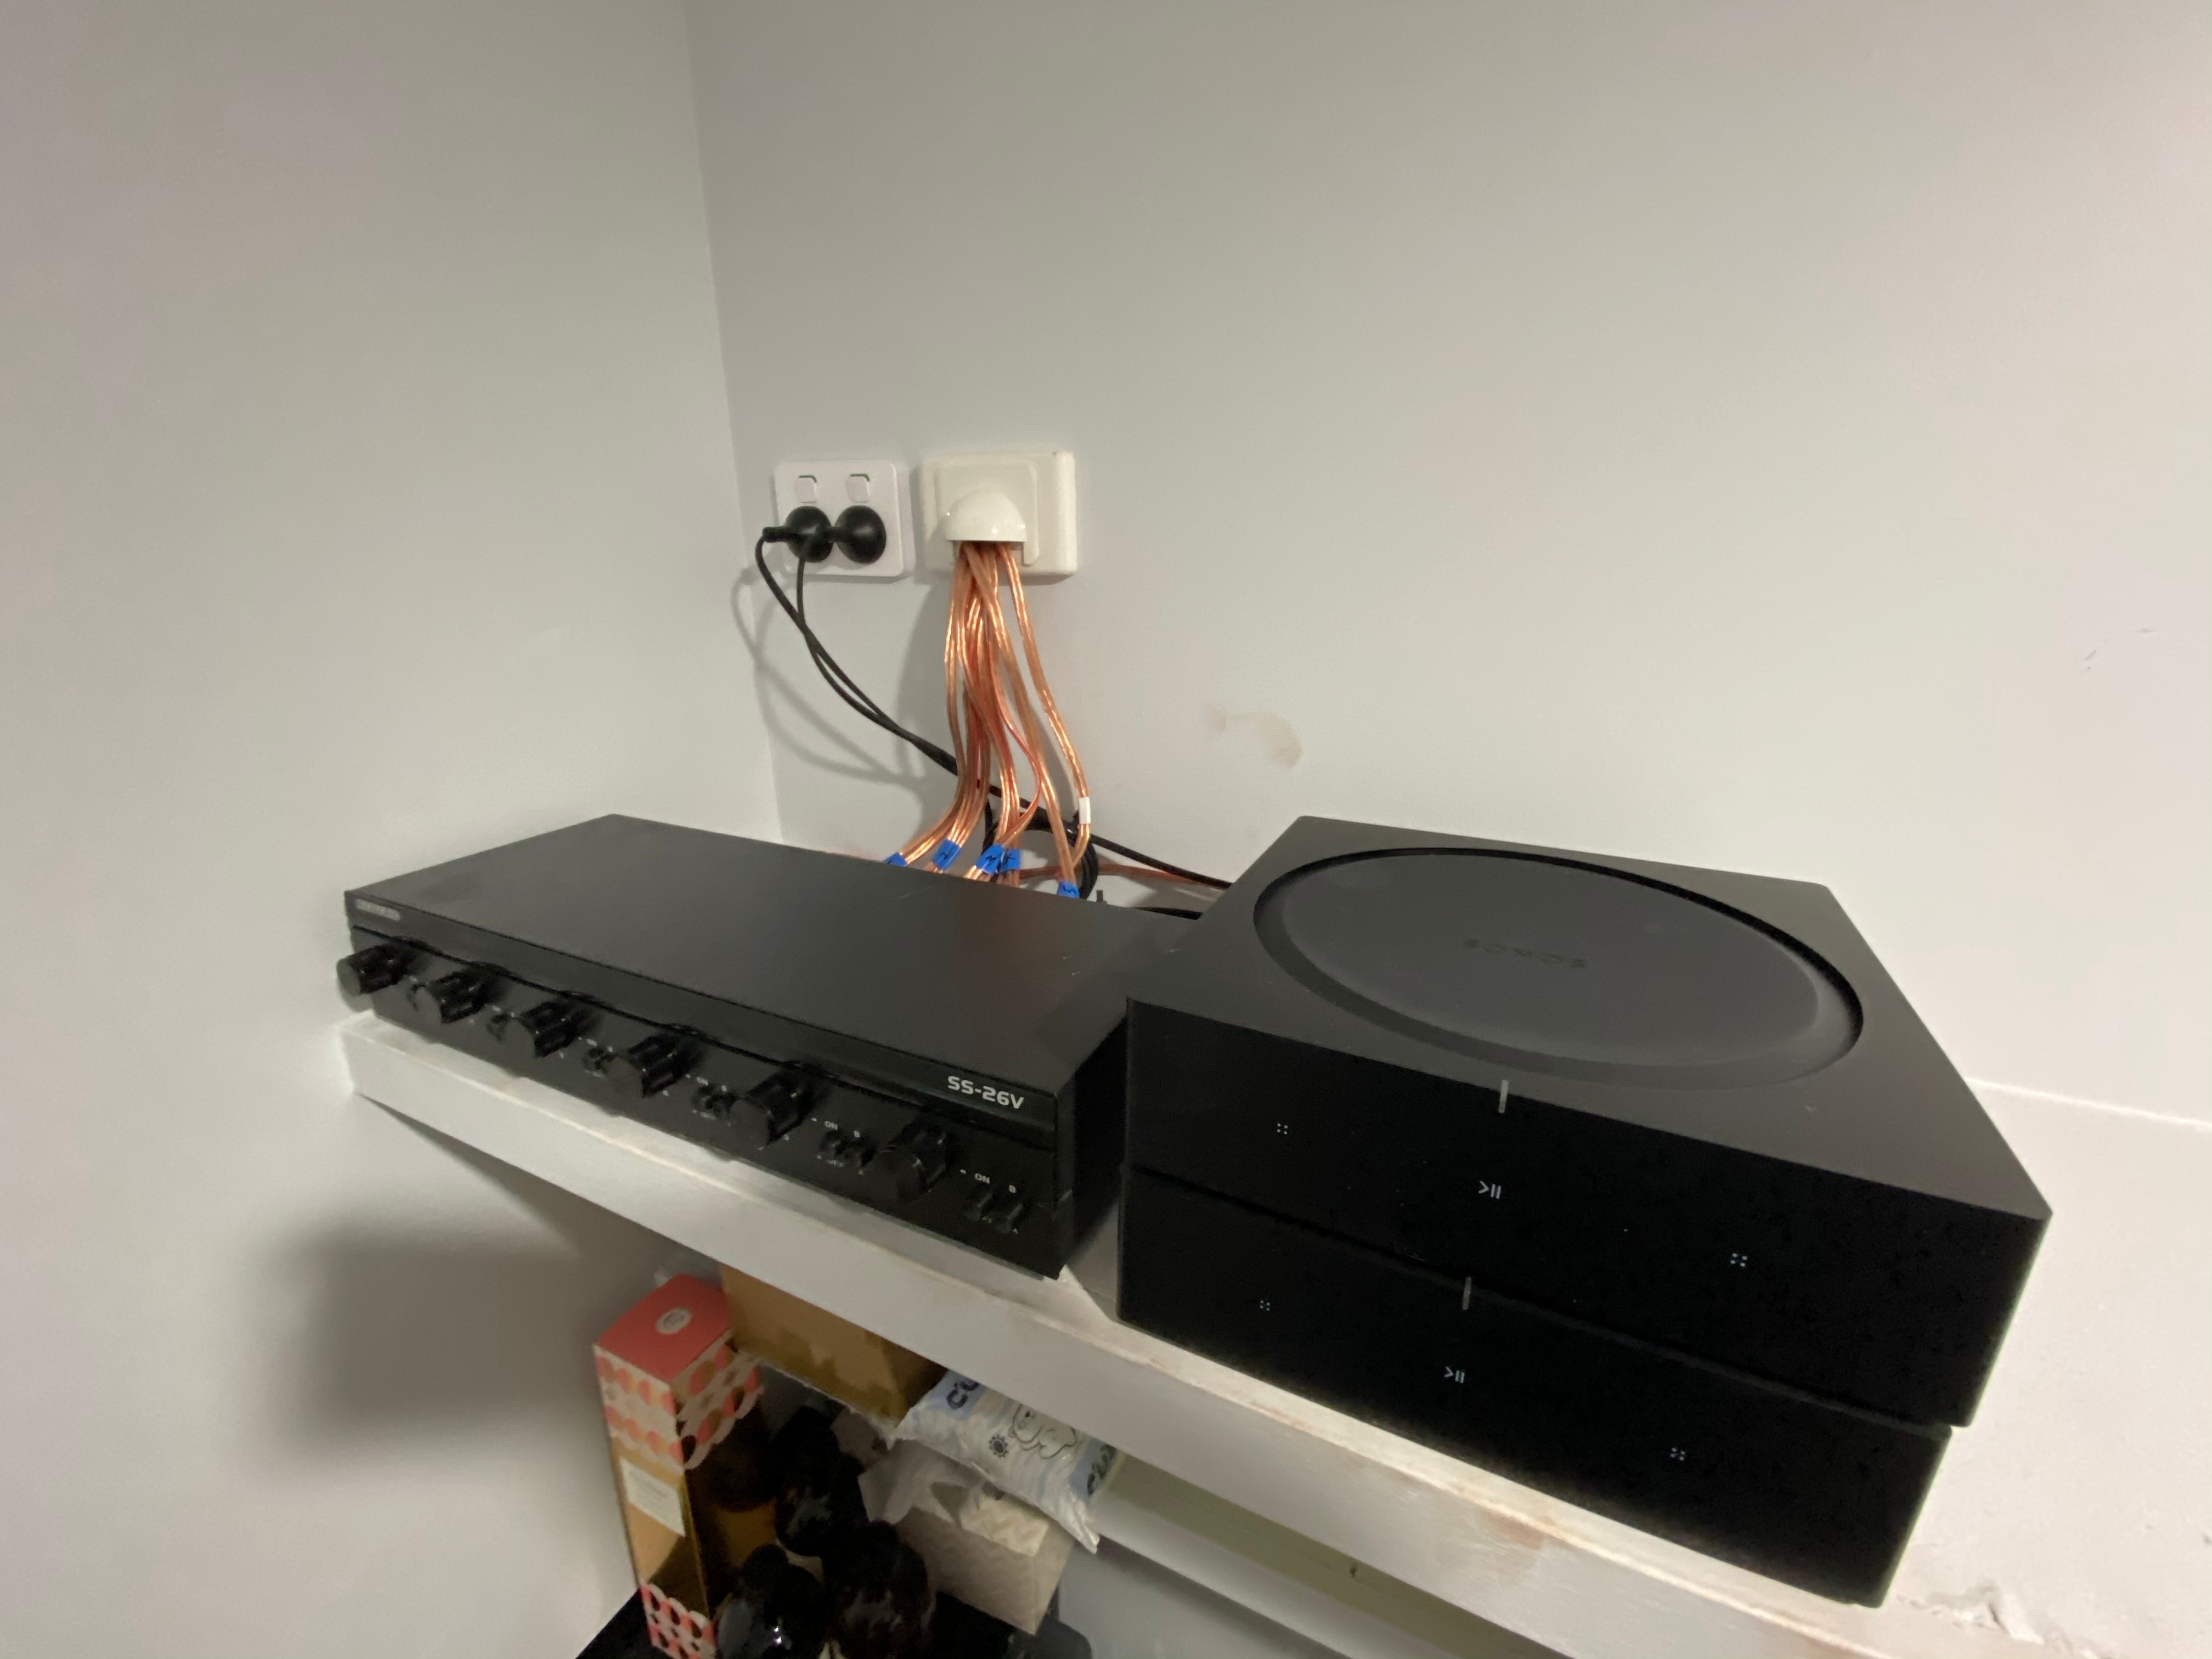 how to install sonos speakers in the ceilling